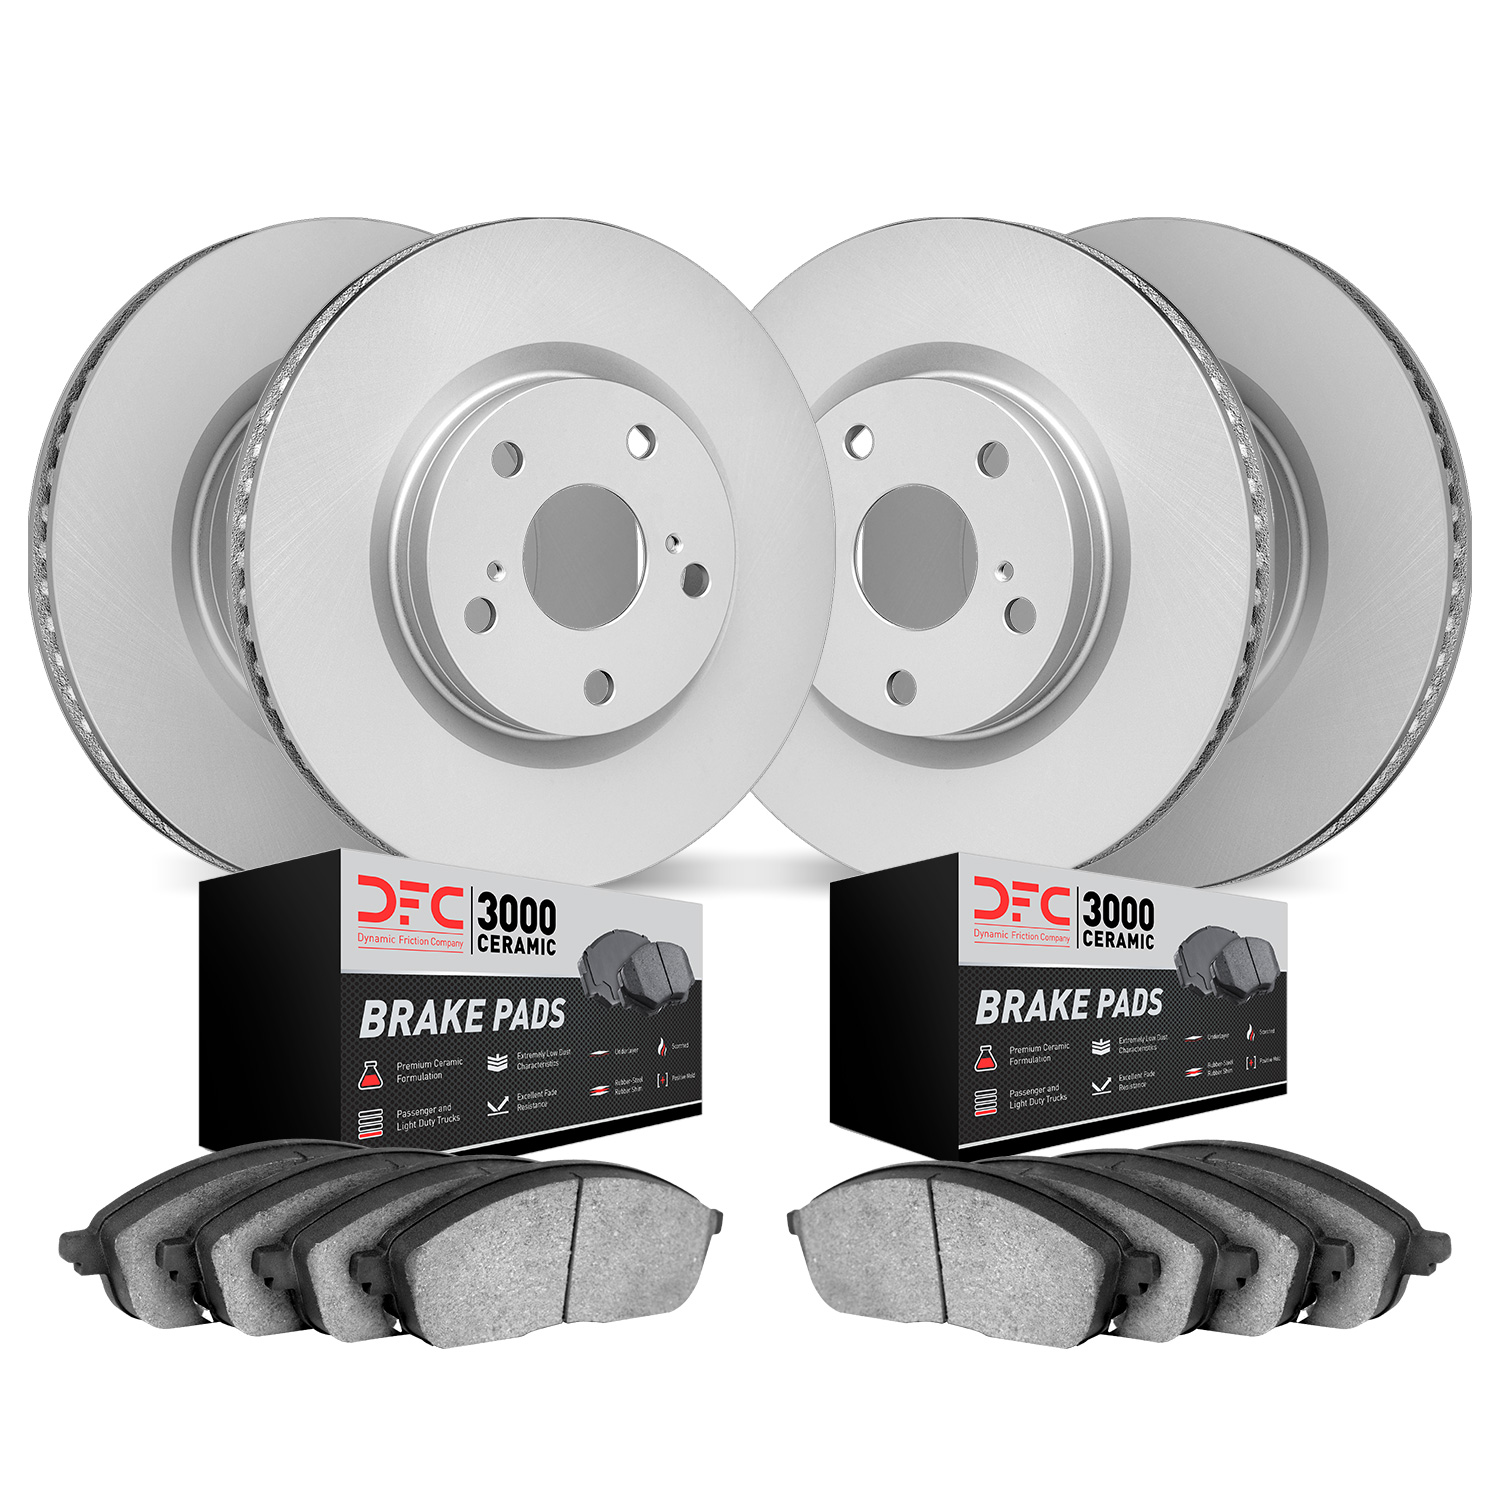 4304-73005 Geospec Brake Rotors with 3000-Series Ceramic Brake Pads Kit, 1999-2004 Audi/Volkswagen, Position: Front and Rear